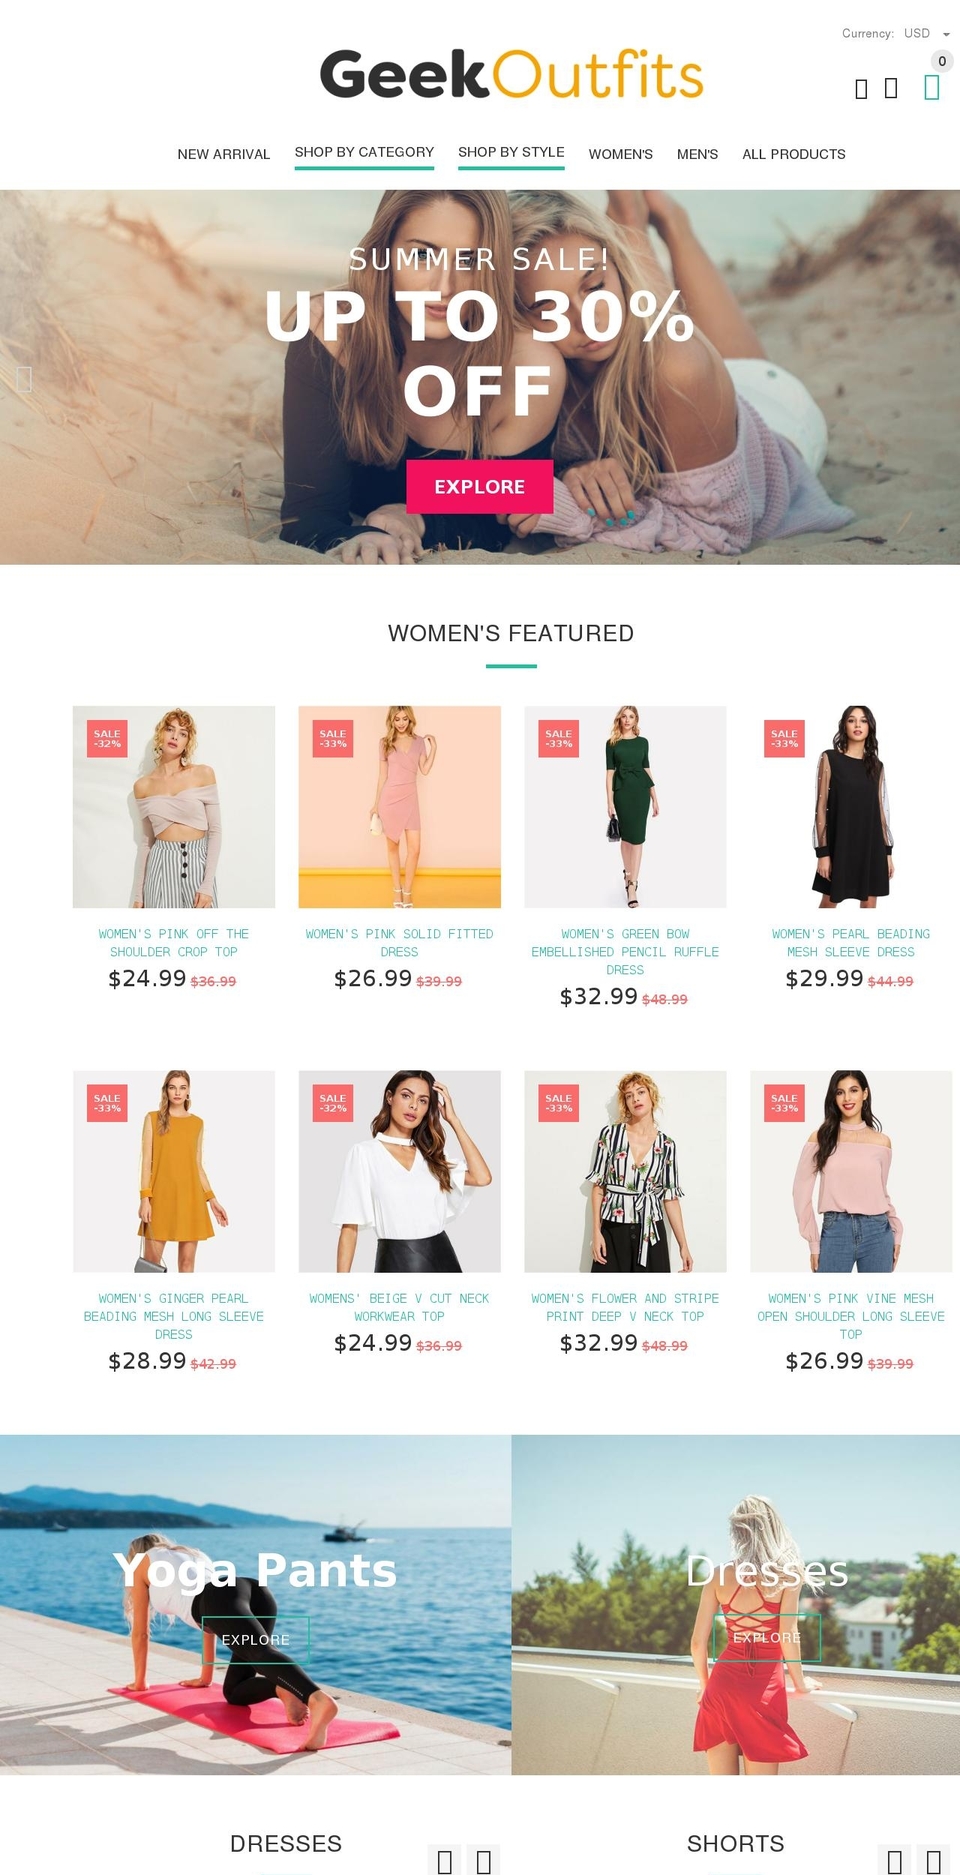 yourstore-v2-1-5 Shopify theme site example geekoutfits.com